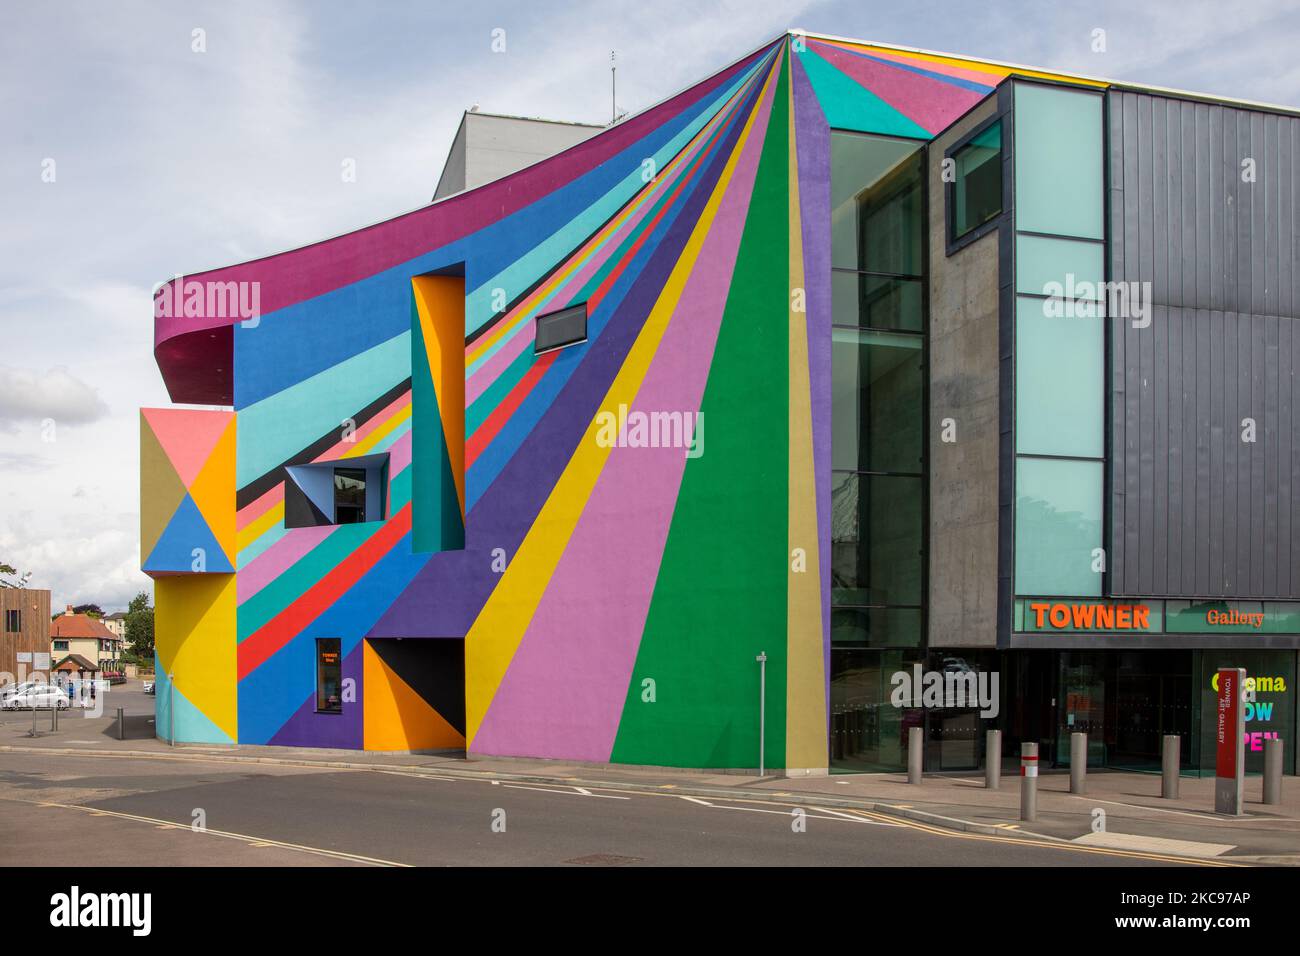 The historic colorful Towner Gallery with a painting by Lothar Gotz in Eastbourn, UK Stock Photo